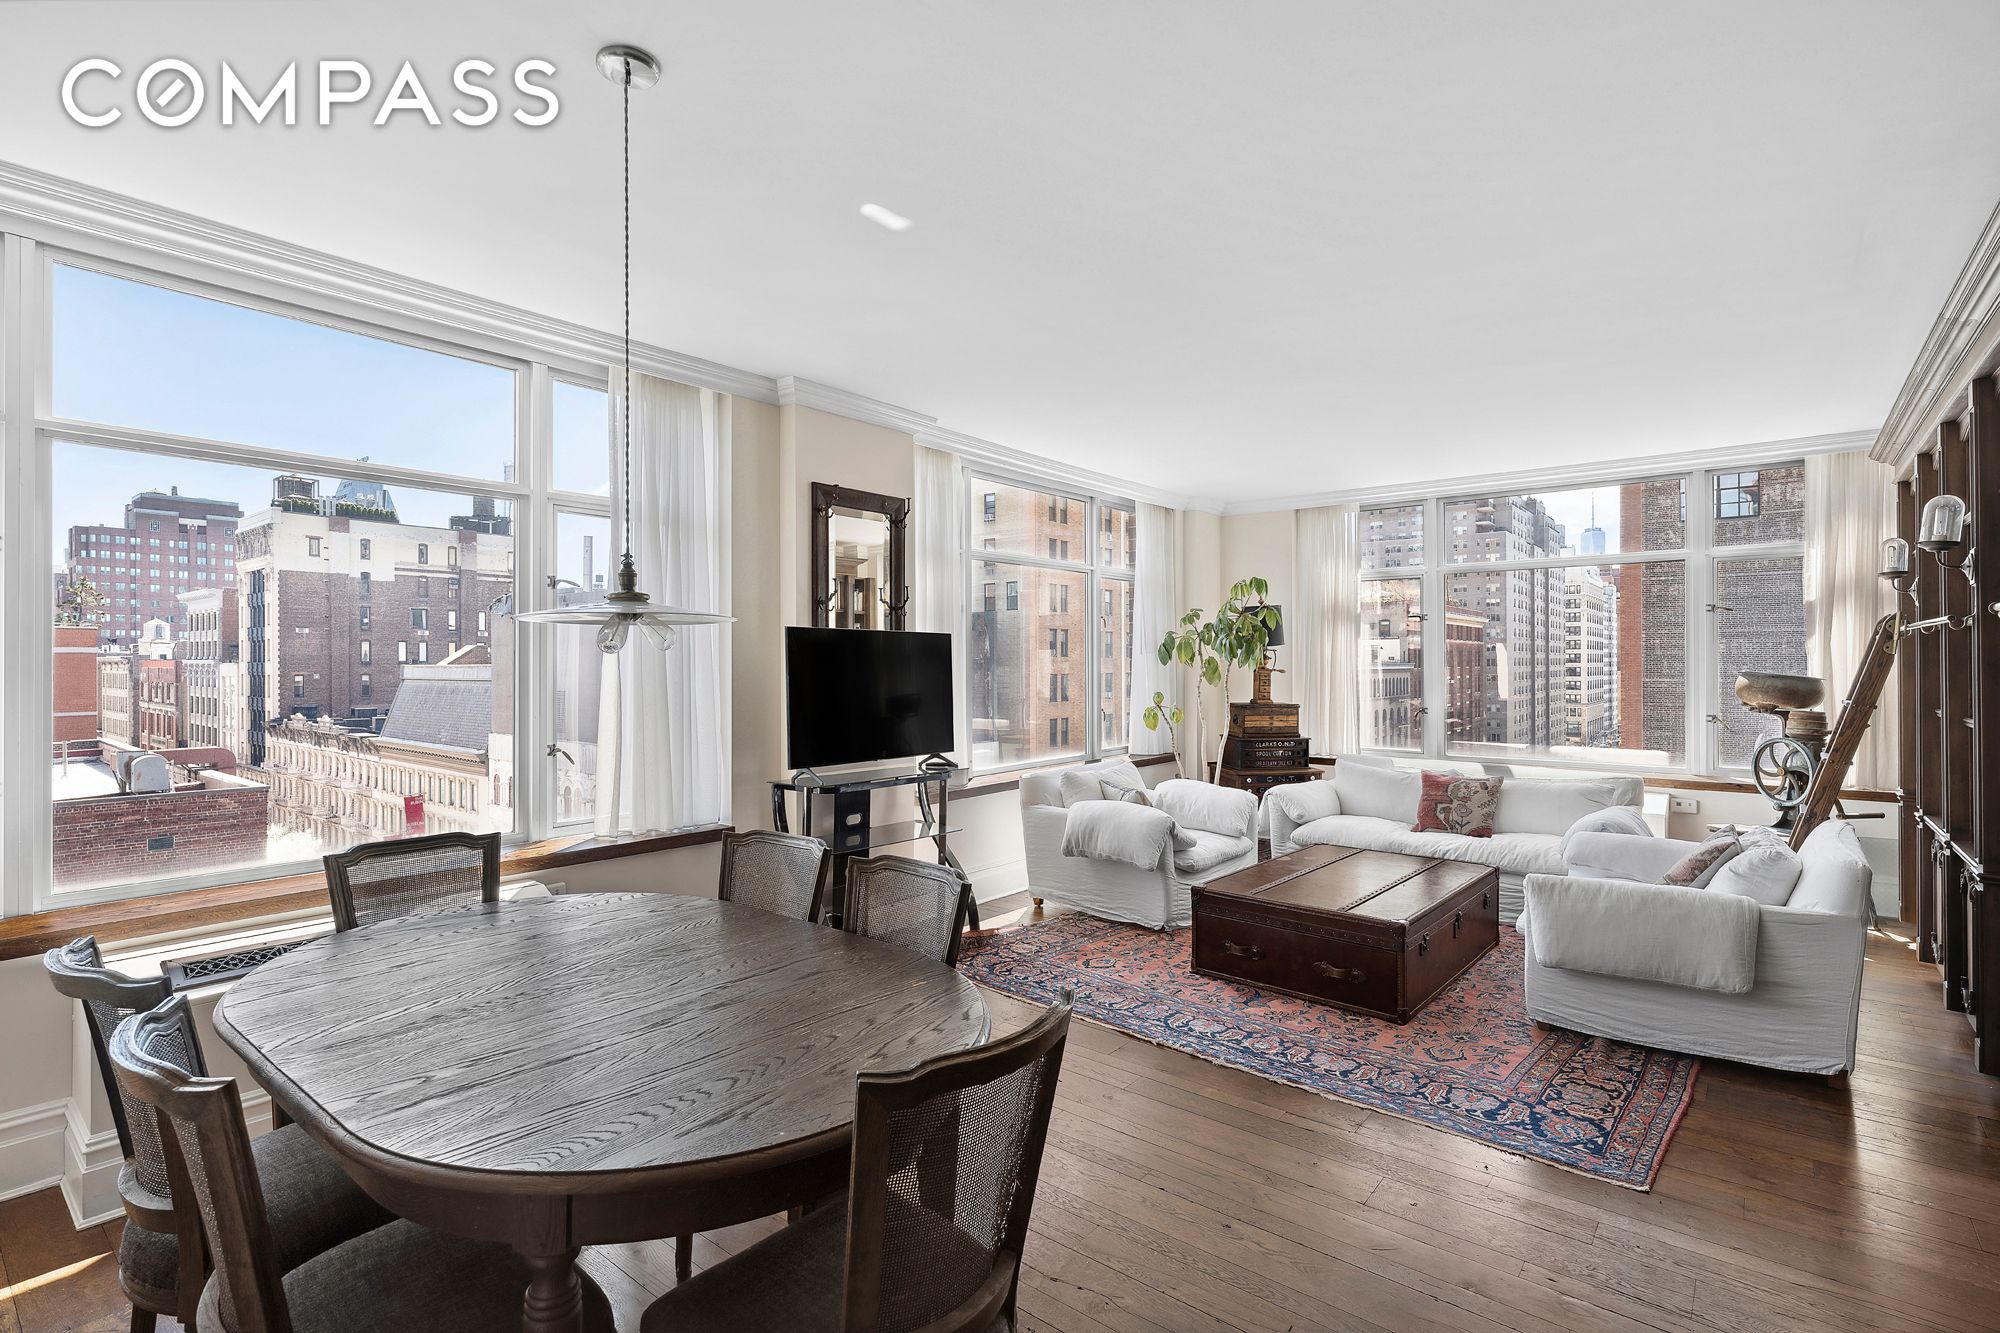 201 West 17th Street 8B, Chelsea, Downtown, NYC - 3 Bedrooms  
2.5 Bathrooms  
7 Rooms - 